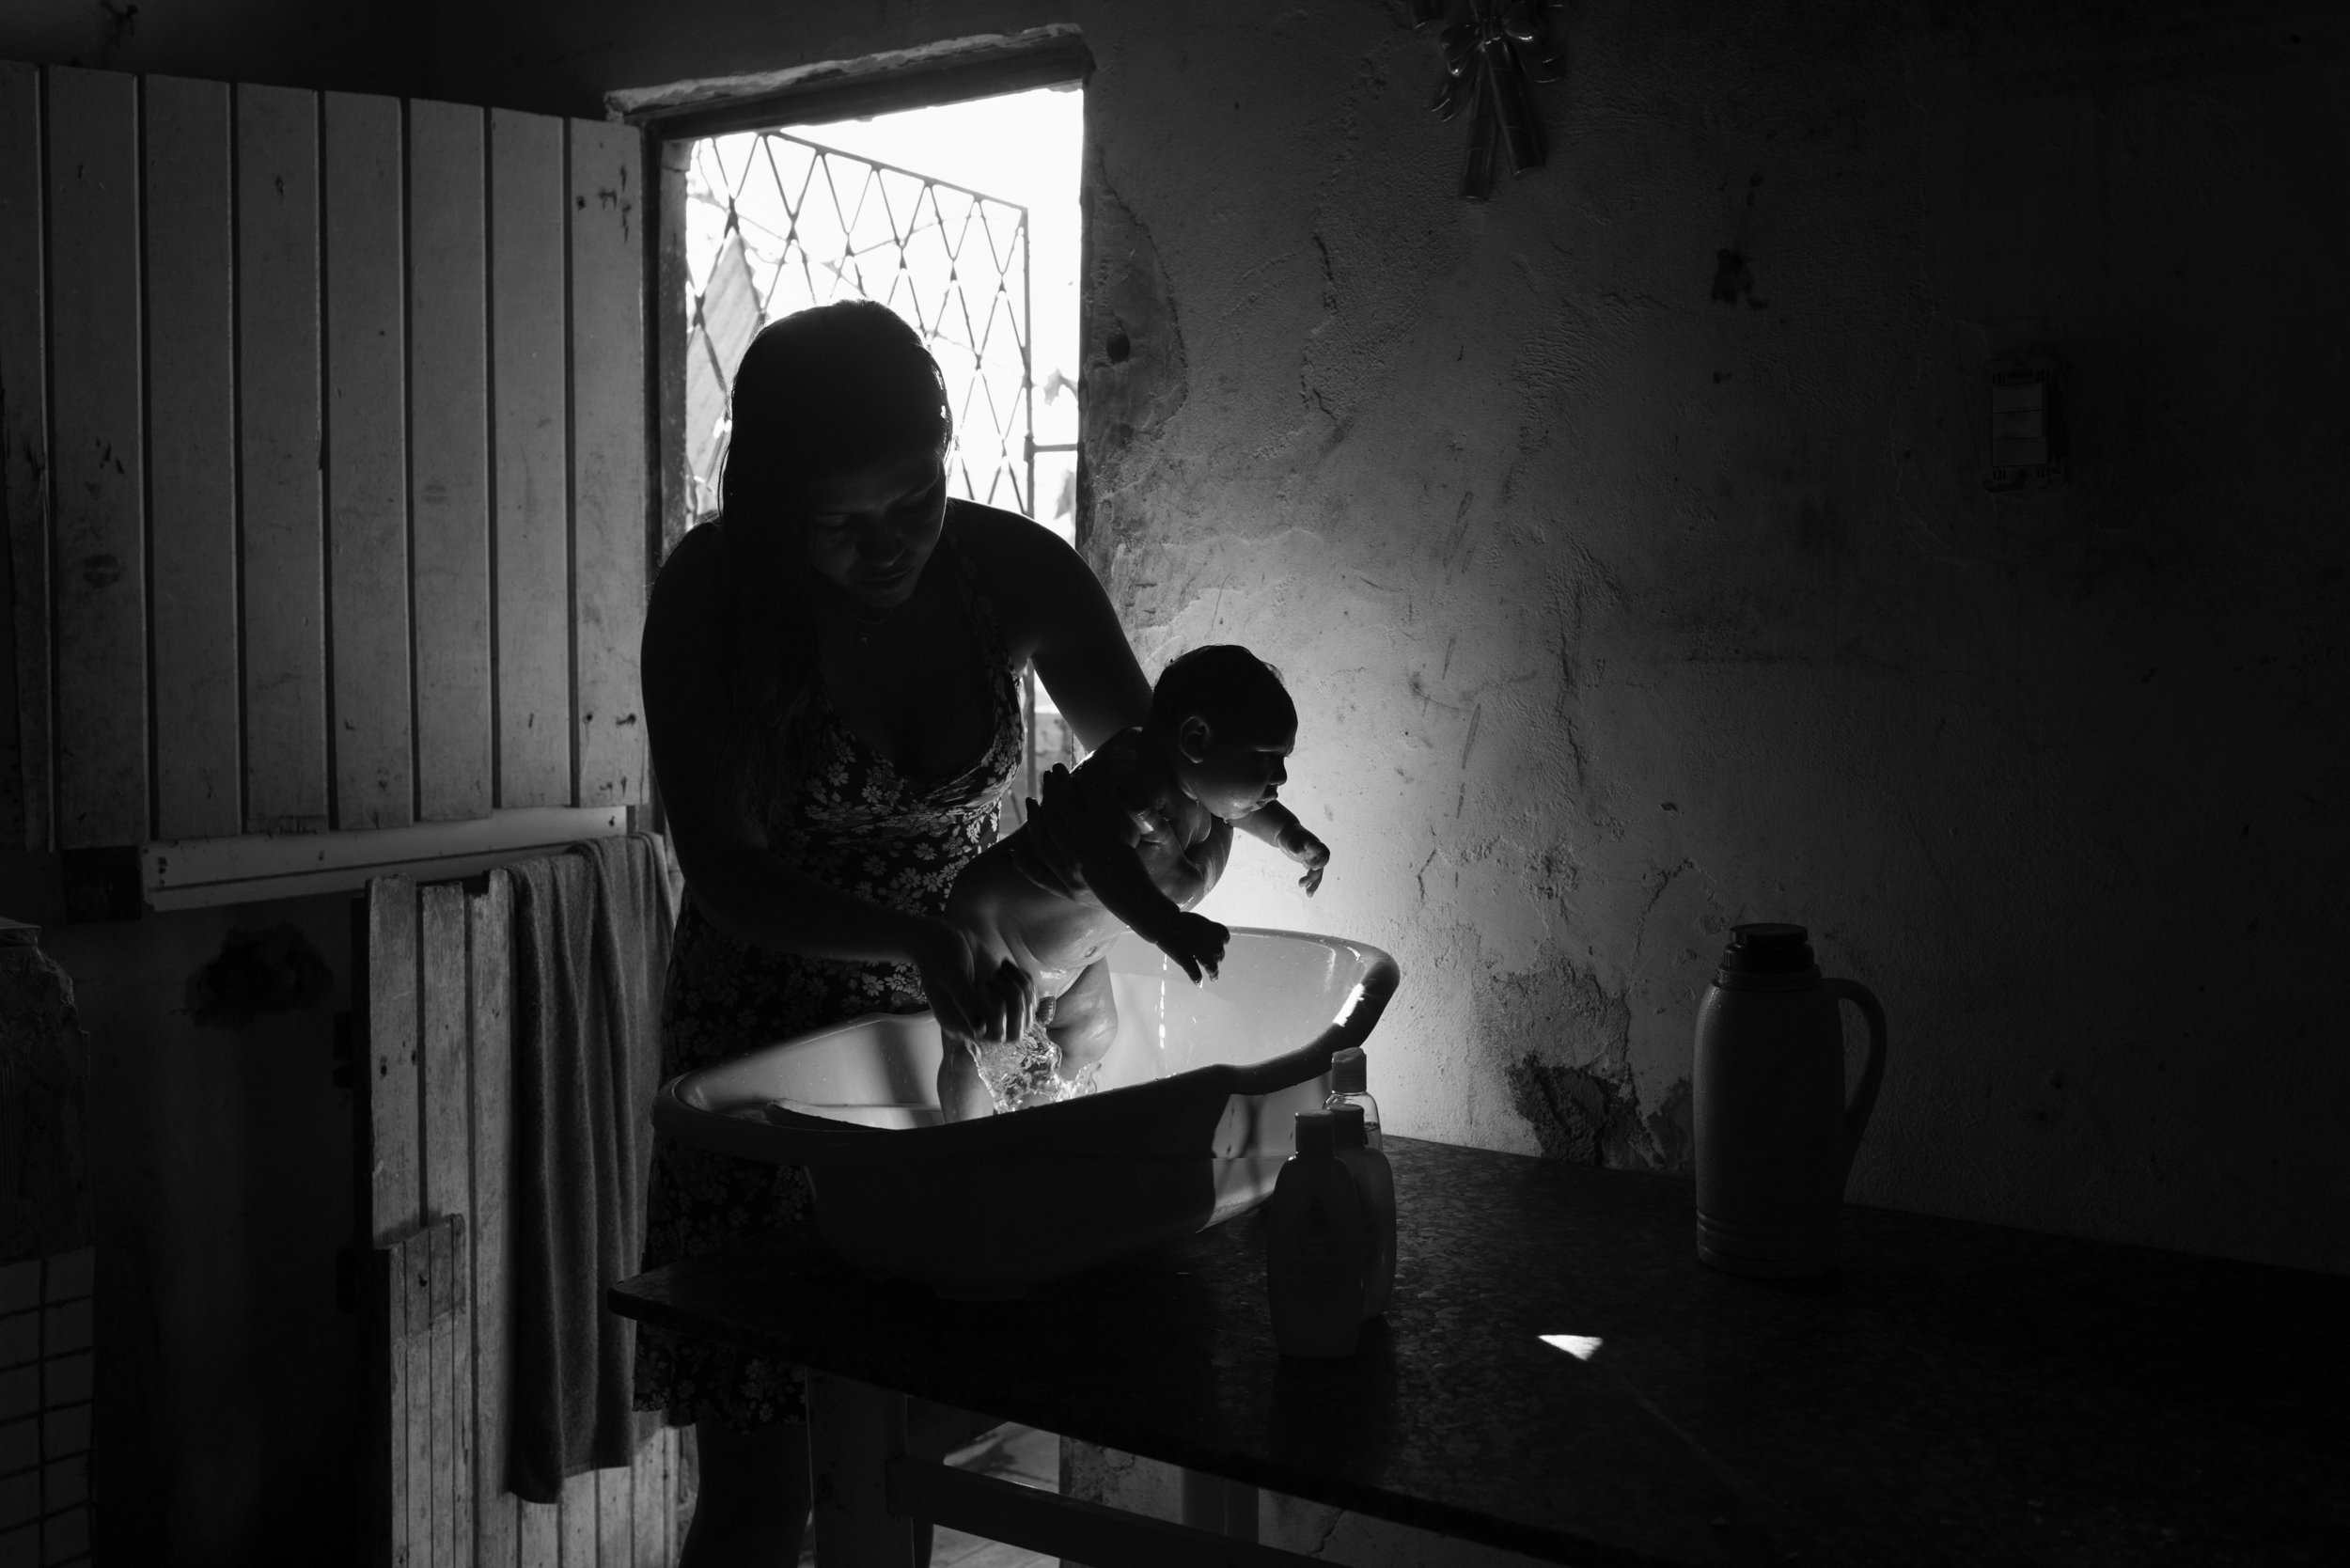  Samuel Amorim, 2 months, who was born with microcephaly, is bathed by a family member in the kitchen of the family’s home in an impoverished neighborhood of Campina Grande, Brazil. Their neighborhood, which does not have running water for three days